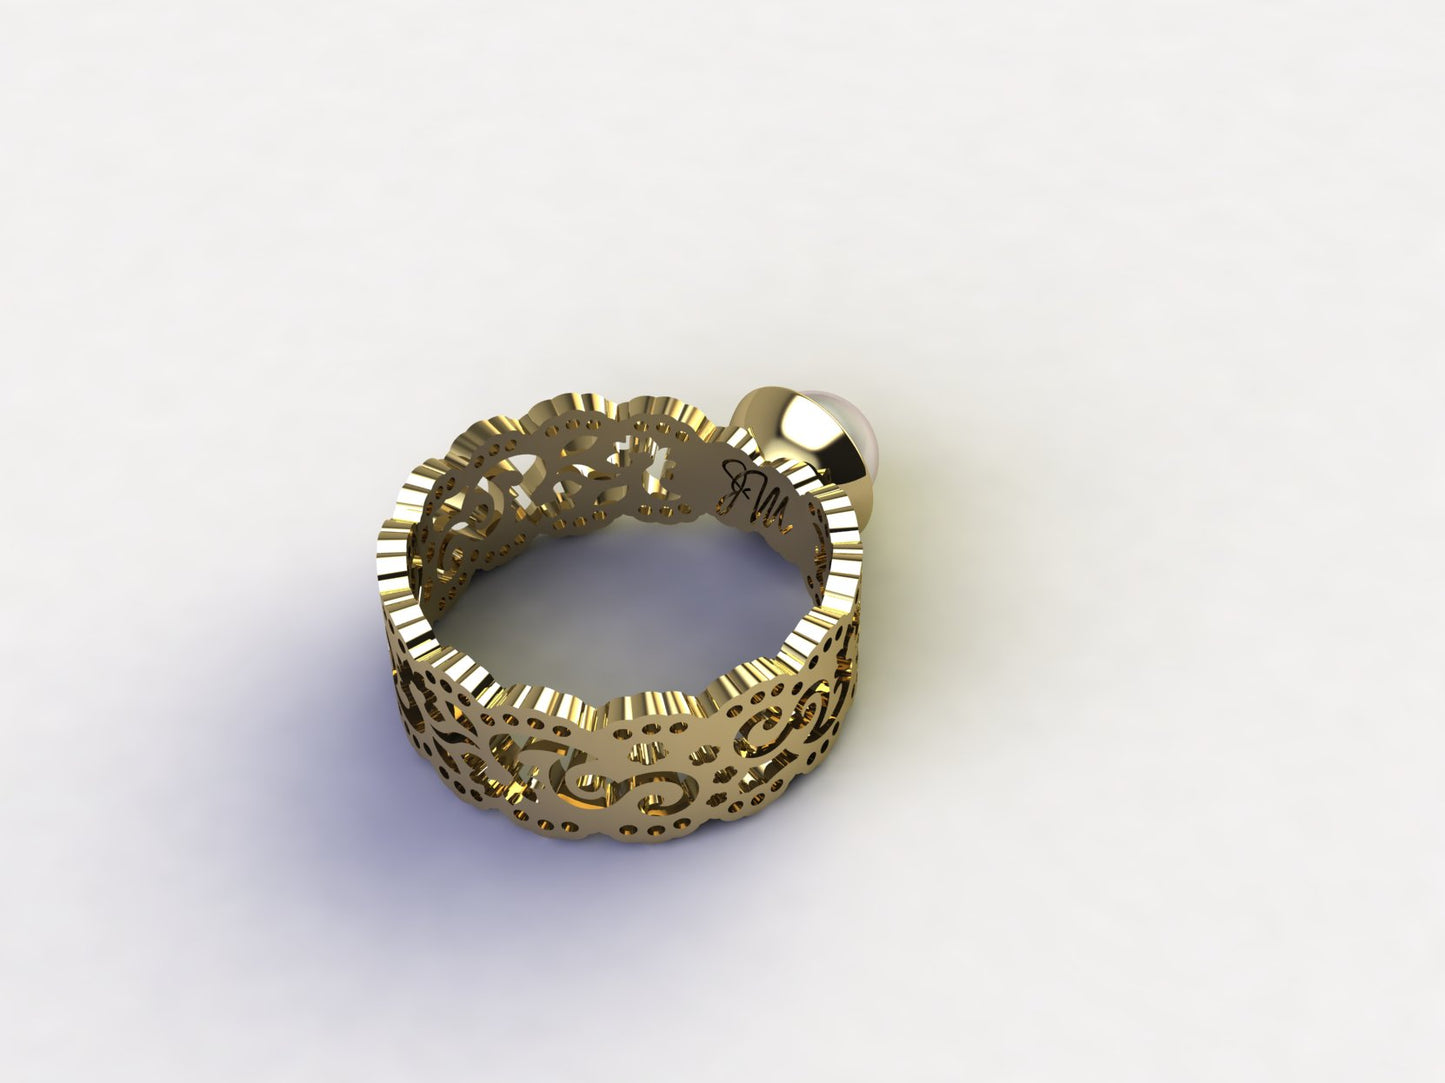 Lace Ring in 24kt gold/ Sterling Silver with Freshwater Round Pearl